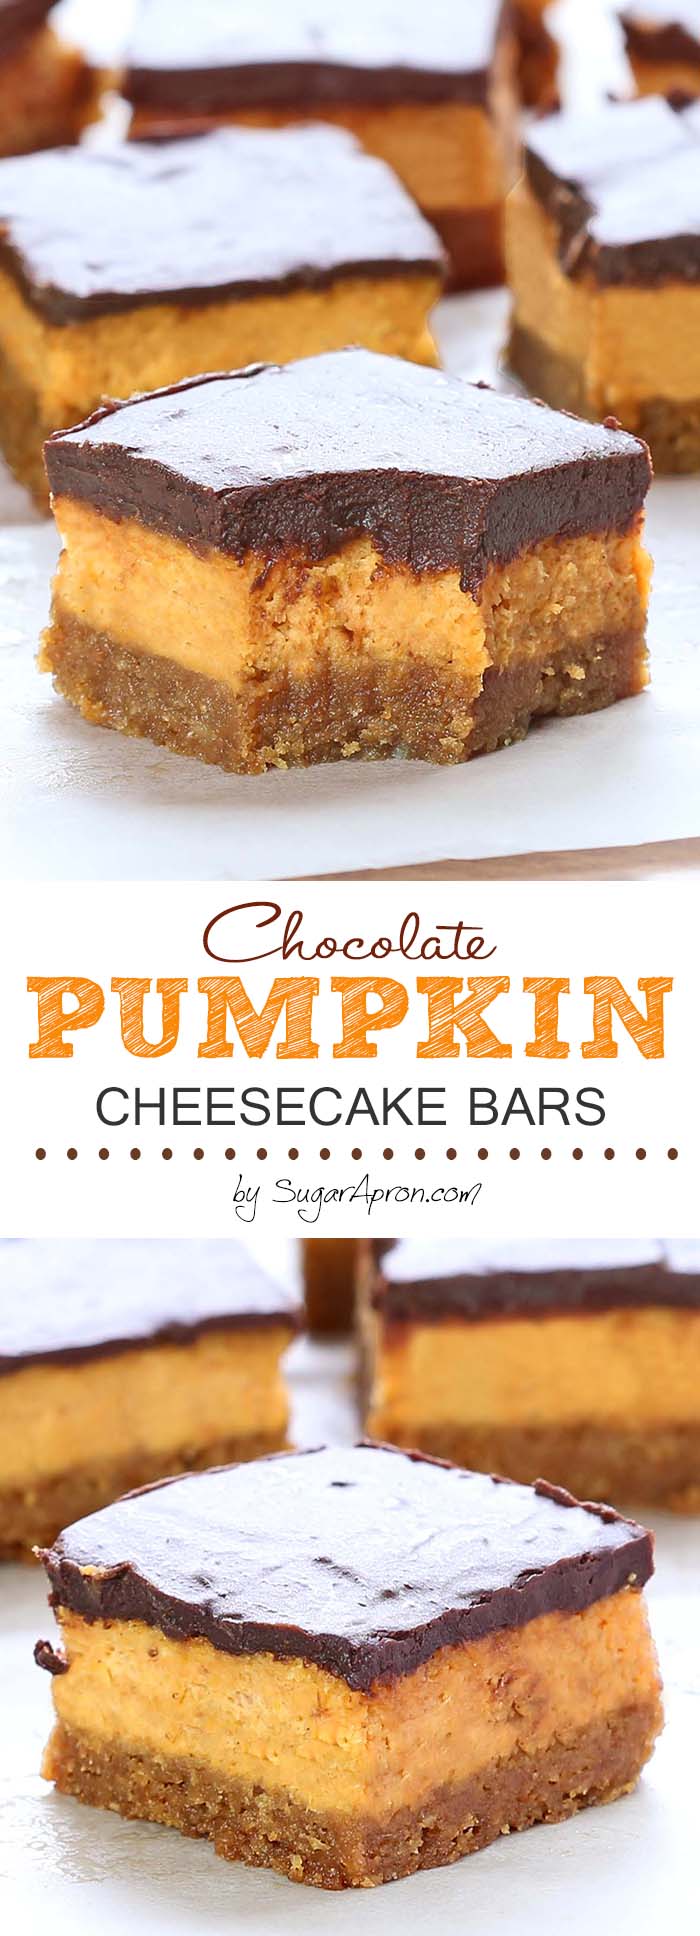 These bars are creamy, chocolate-ly, packed with pumpkin and cream cheese. #popular